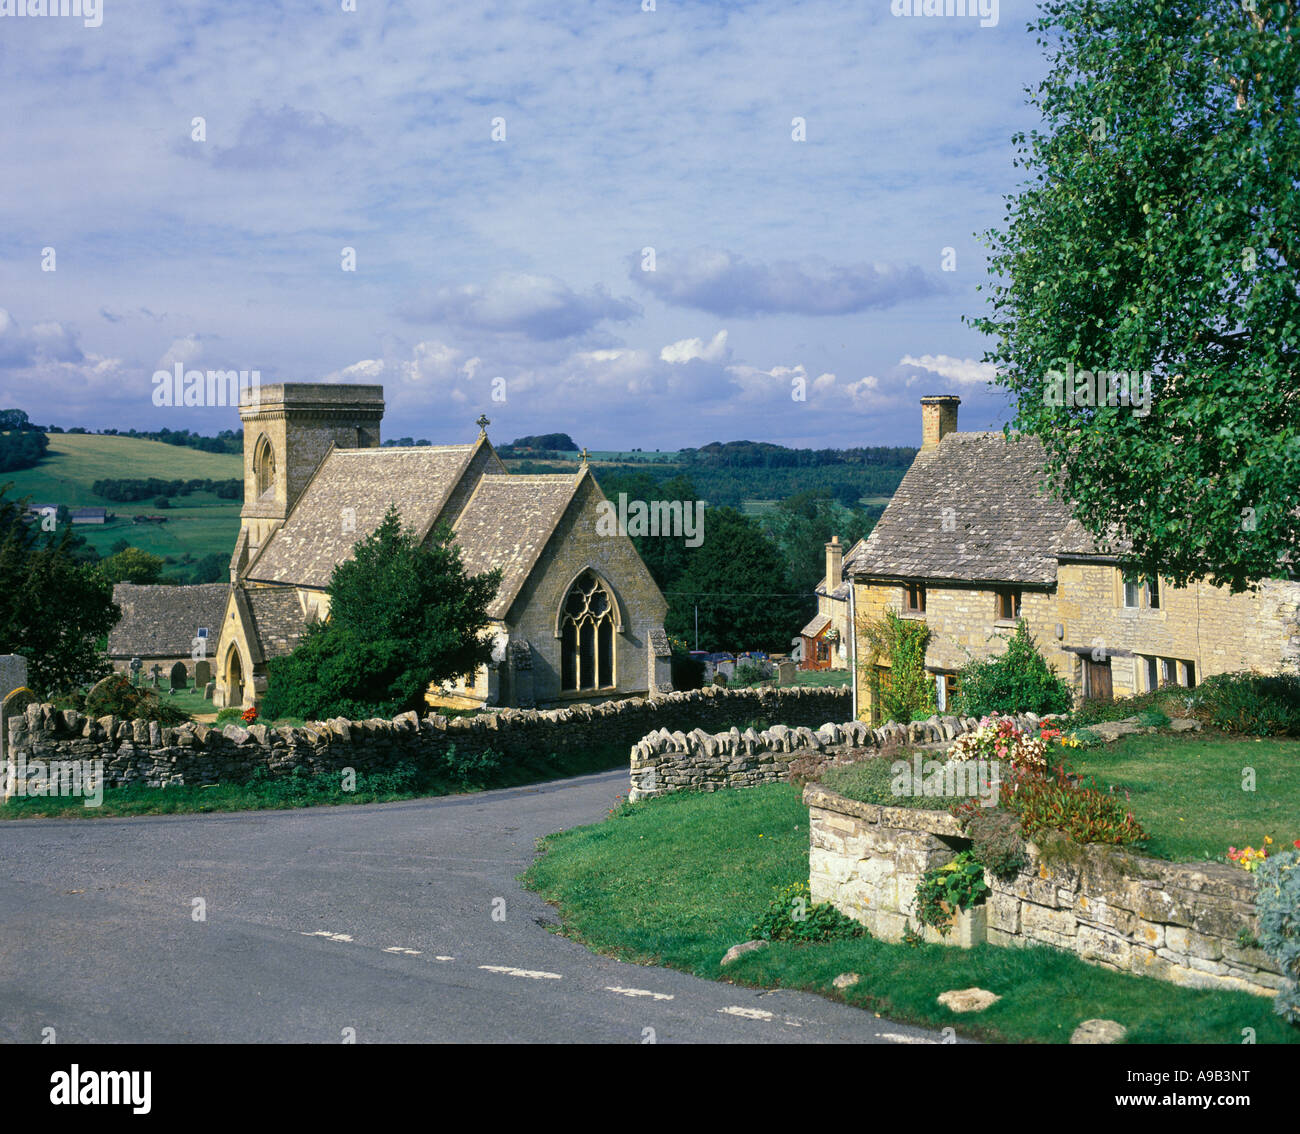 ST. BARNABAS CHURCH COTTAGES SNOWSHILL VILLAGE GLOUCESTERSHIRE COTSWOLDS ENGLAND UK Stockfoto